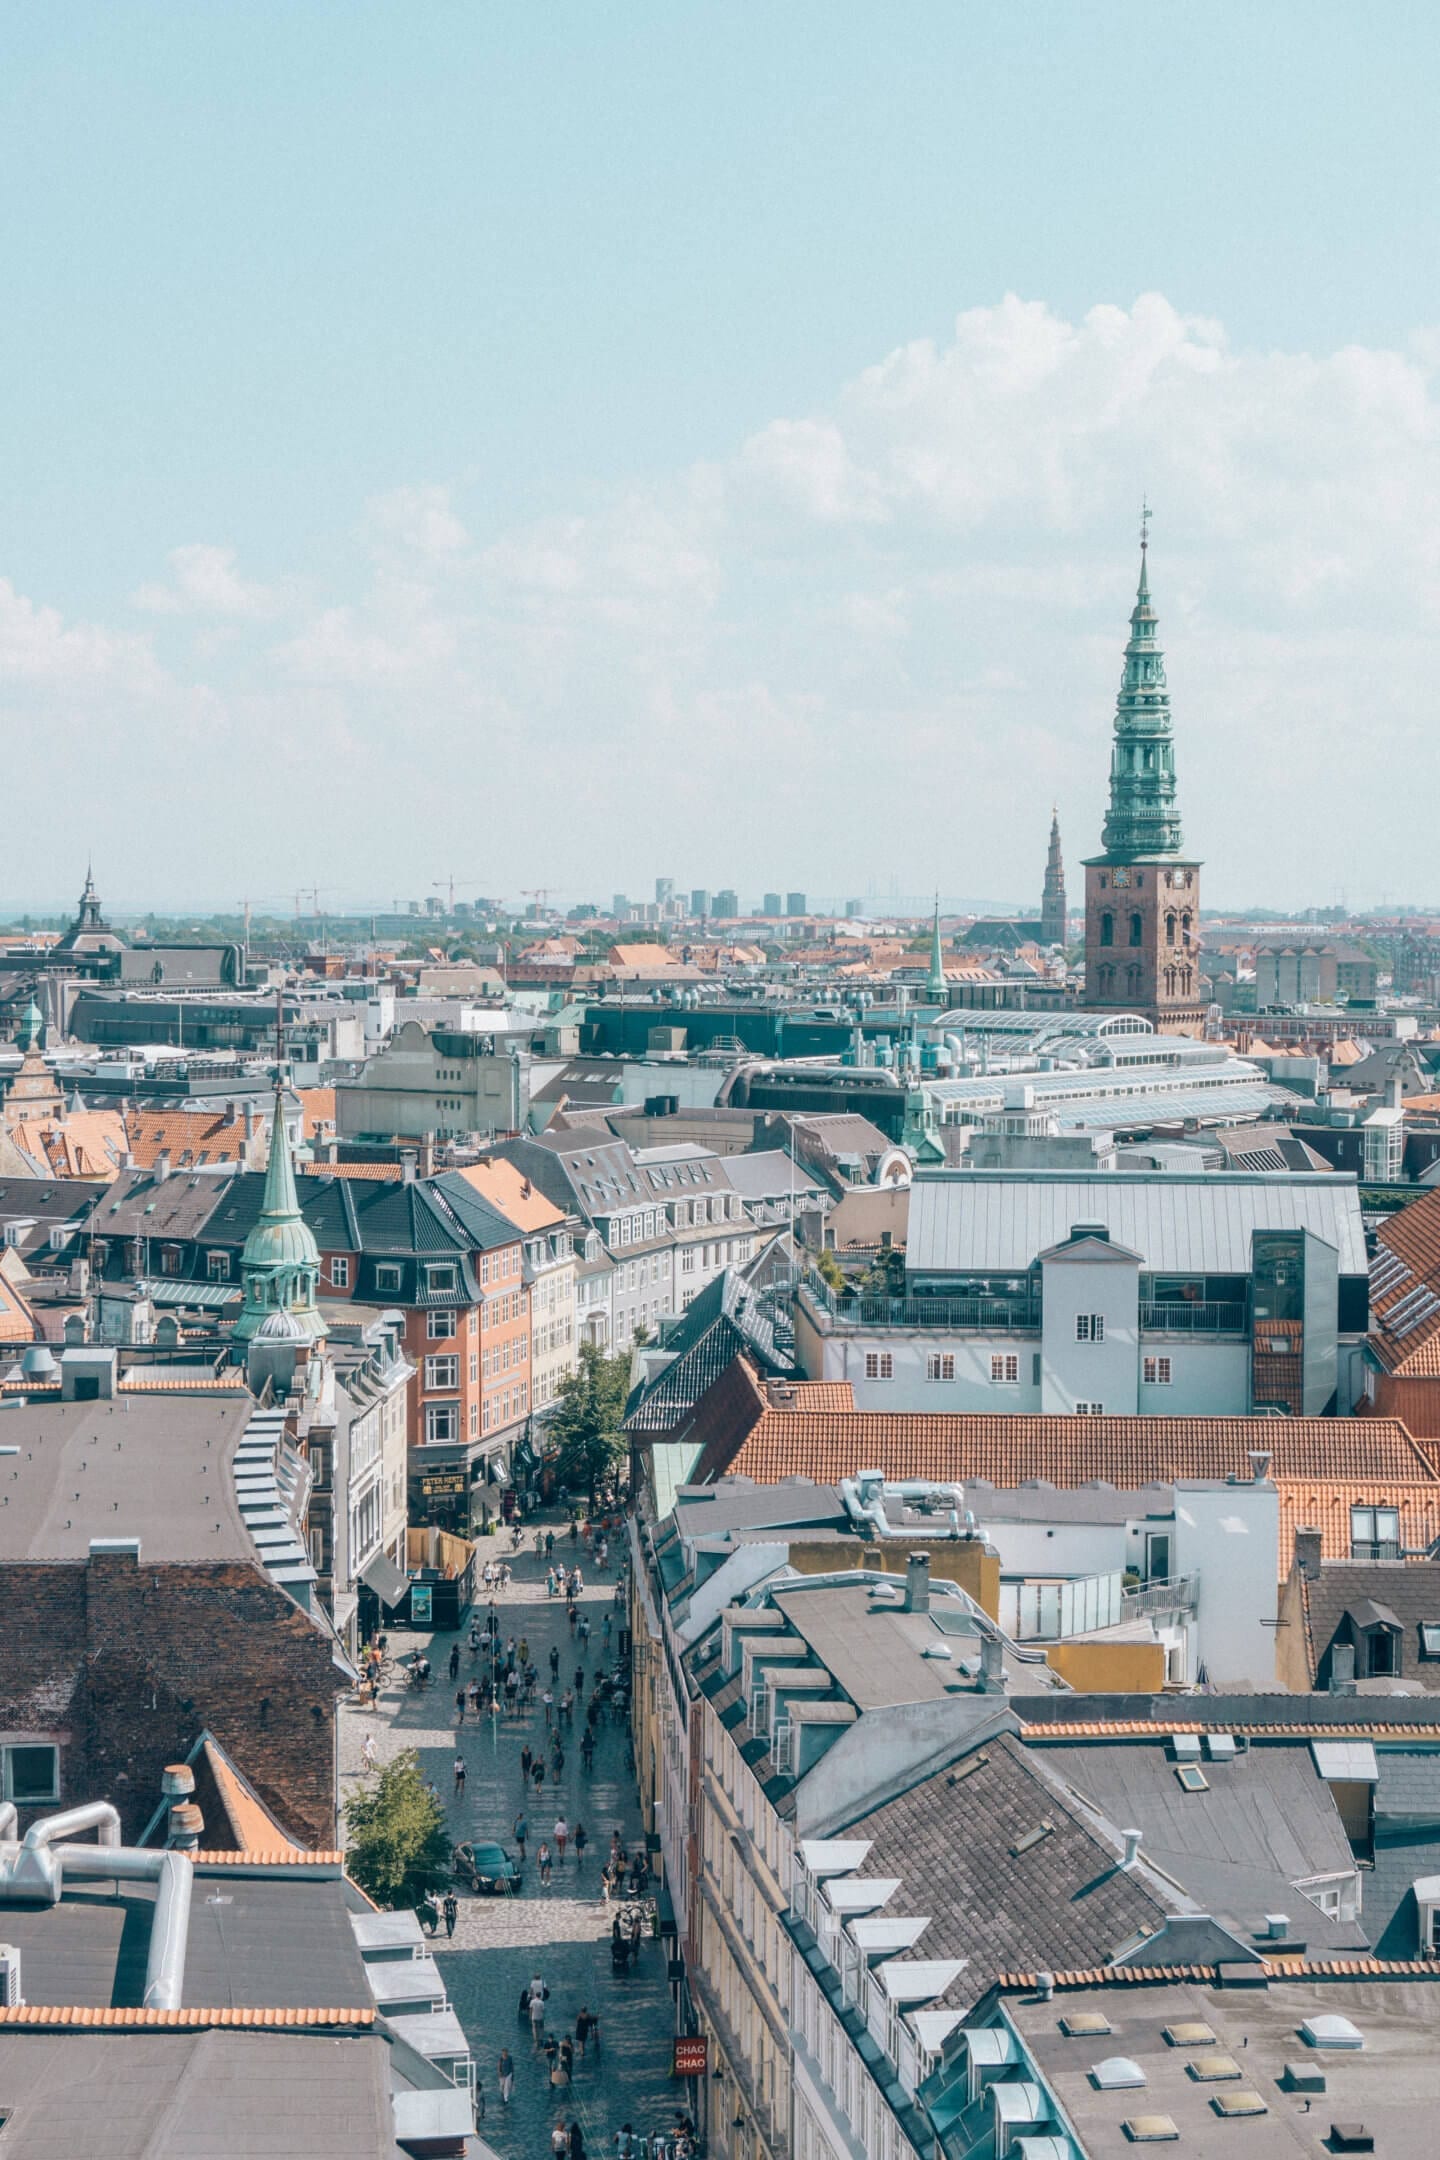 The view at the top of the astronomy tower in Copenhagen